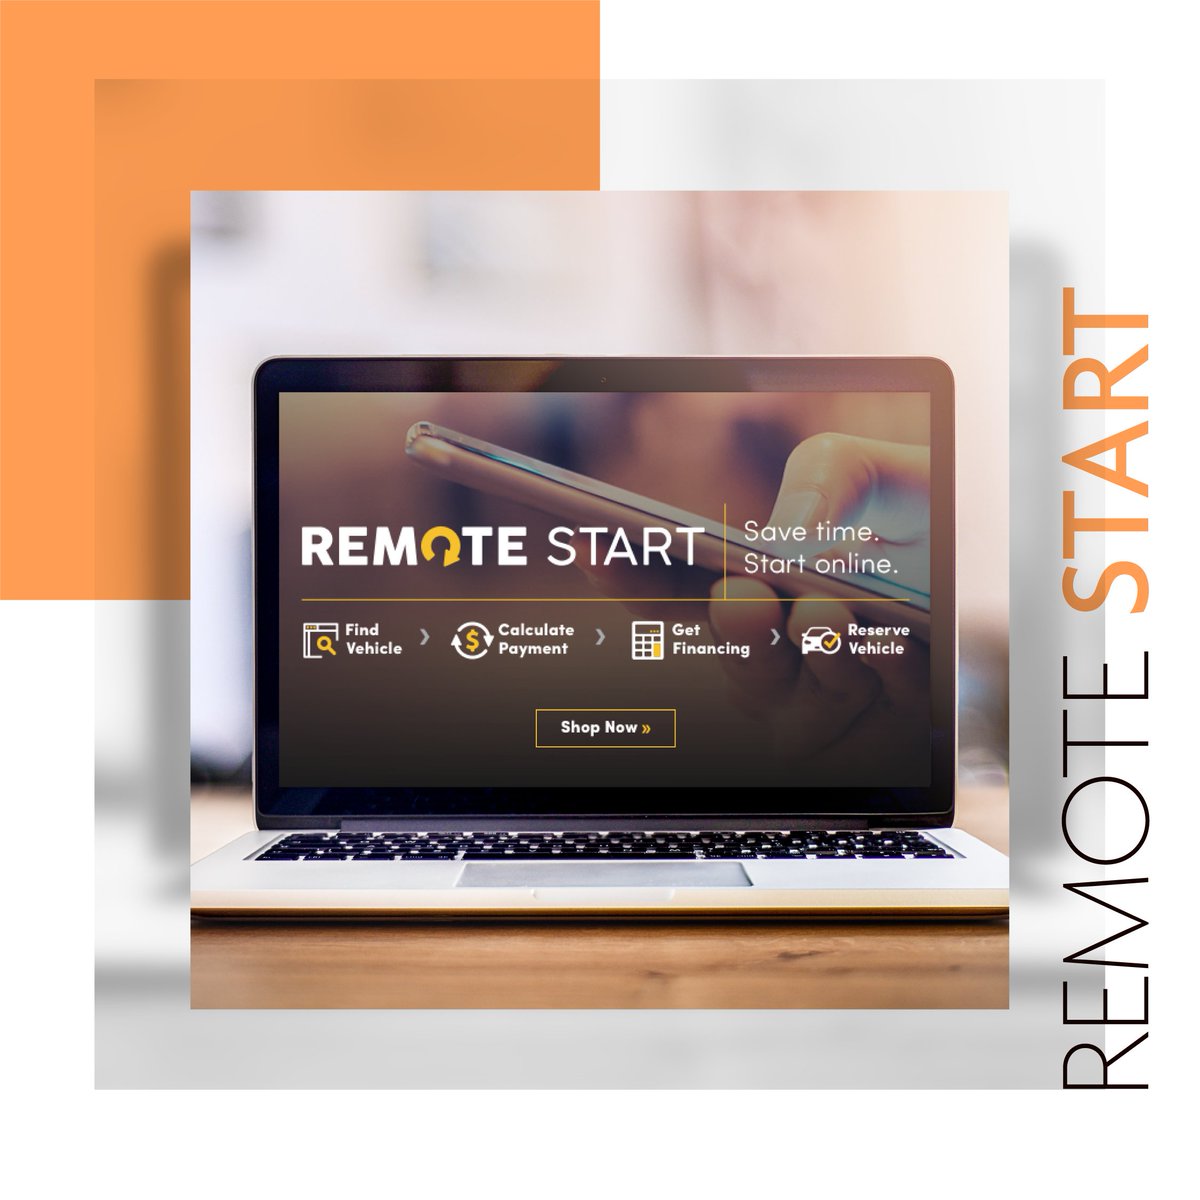 Shop for your next vehicle online with Remote Start! With just a few easy steps, you can select your vehicle, calculate your payment, and value your trade-in. Then we'll contact you to finalize and sign your deal! #RemoteStart
Get started now: ow.ly/EaQW50Mk1sP